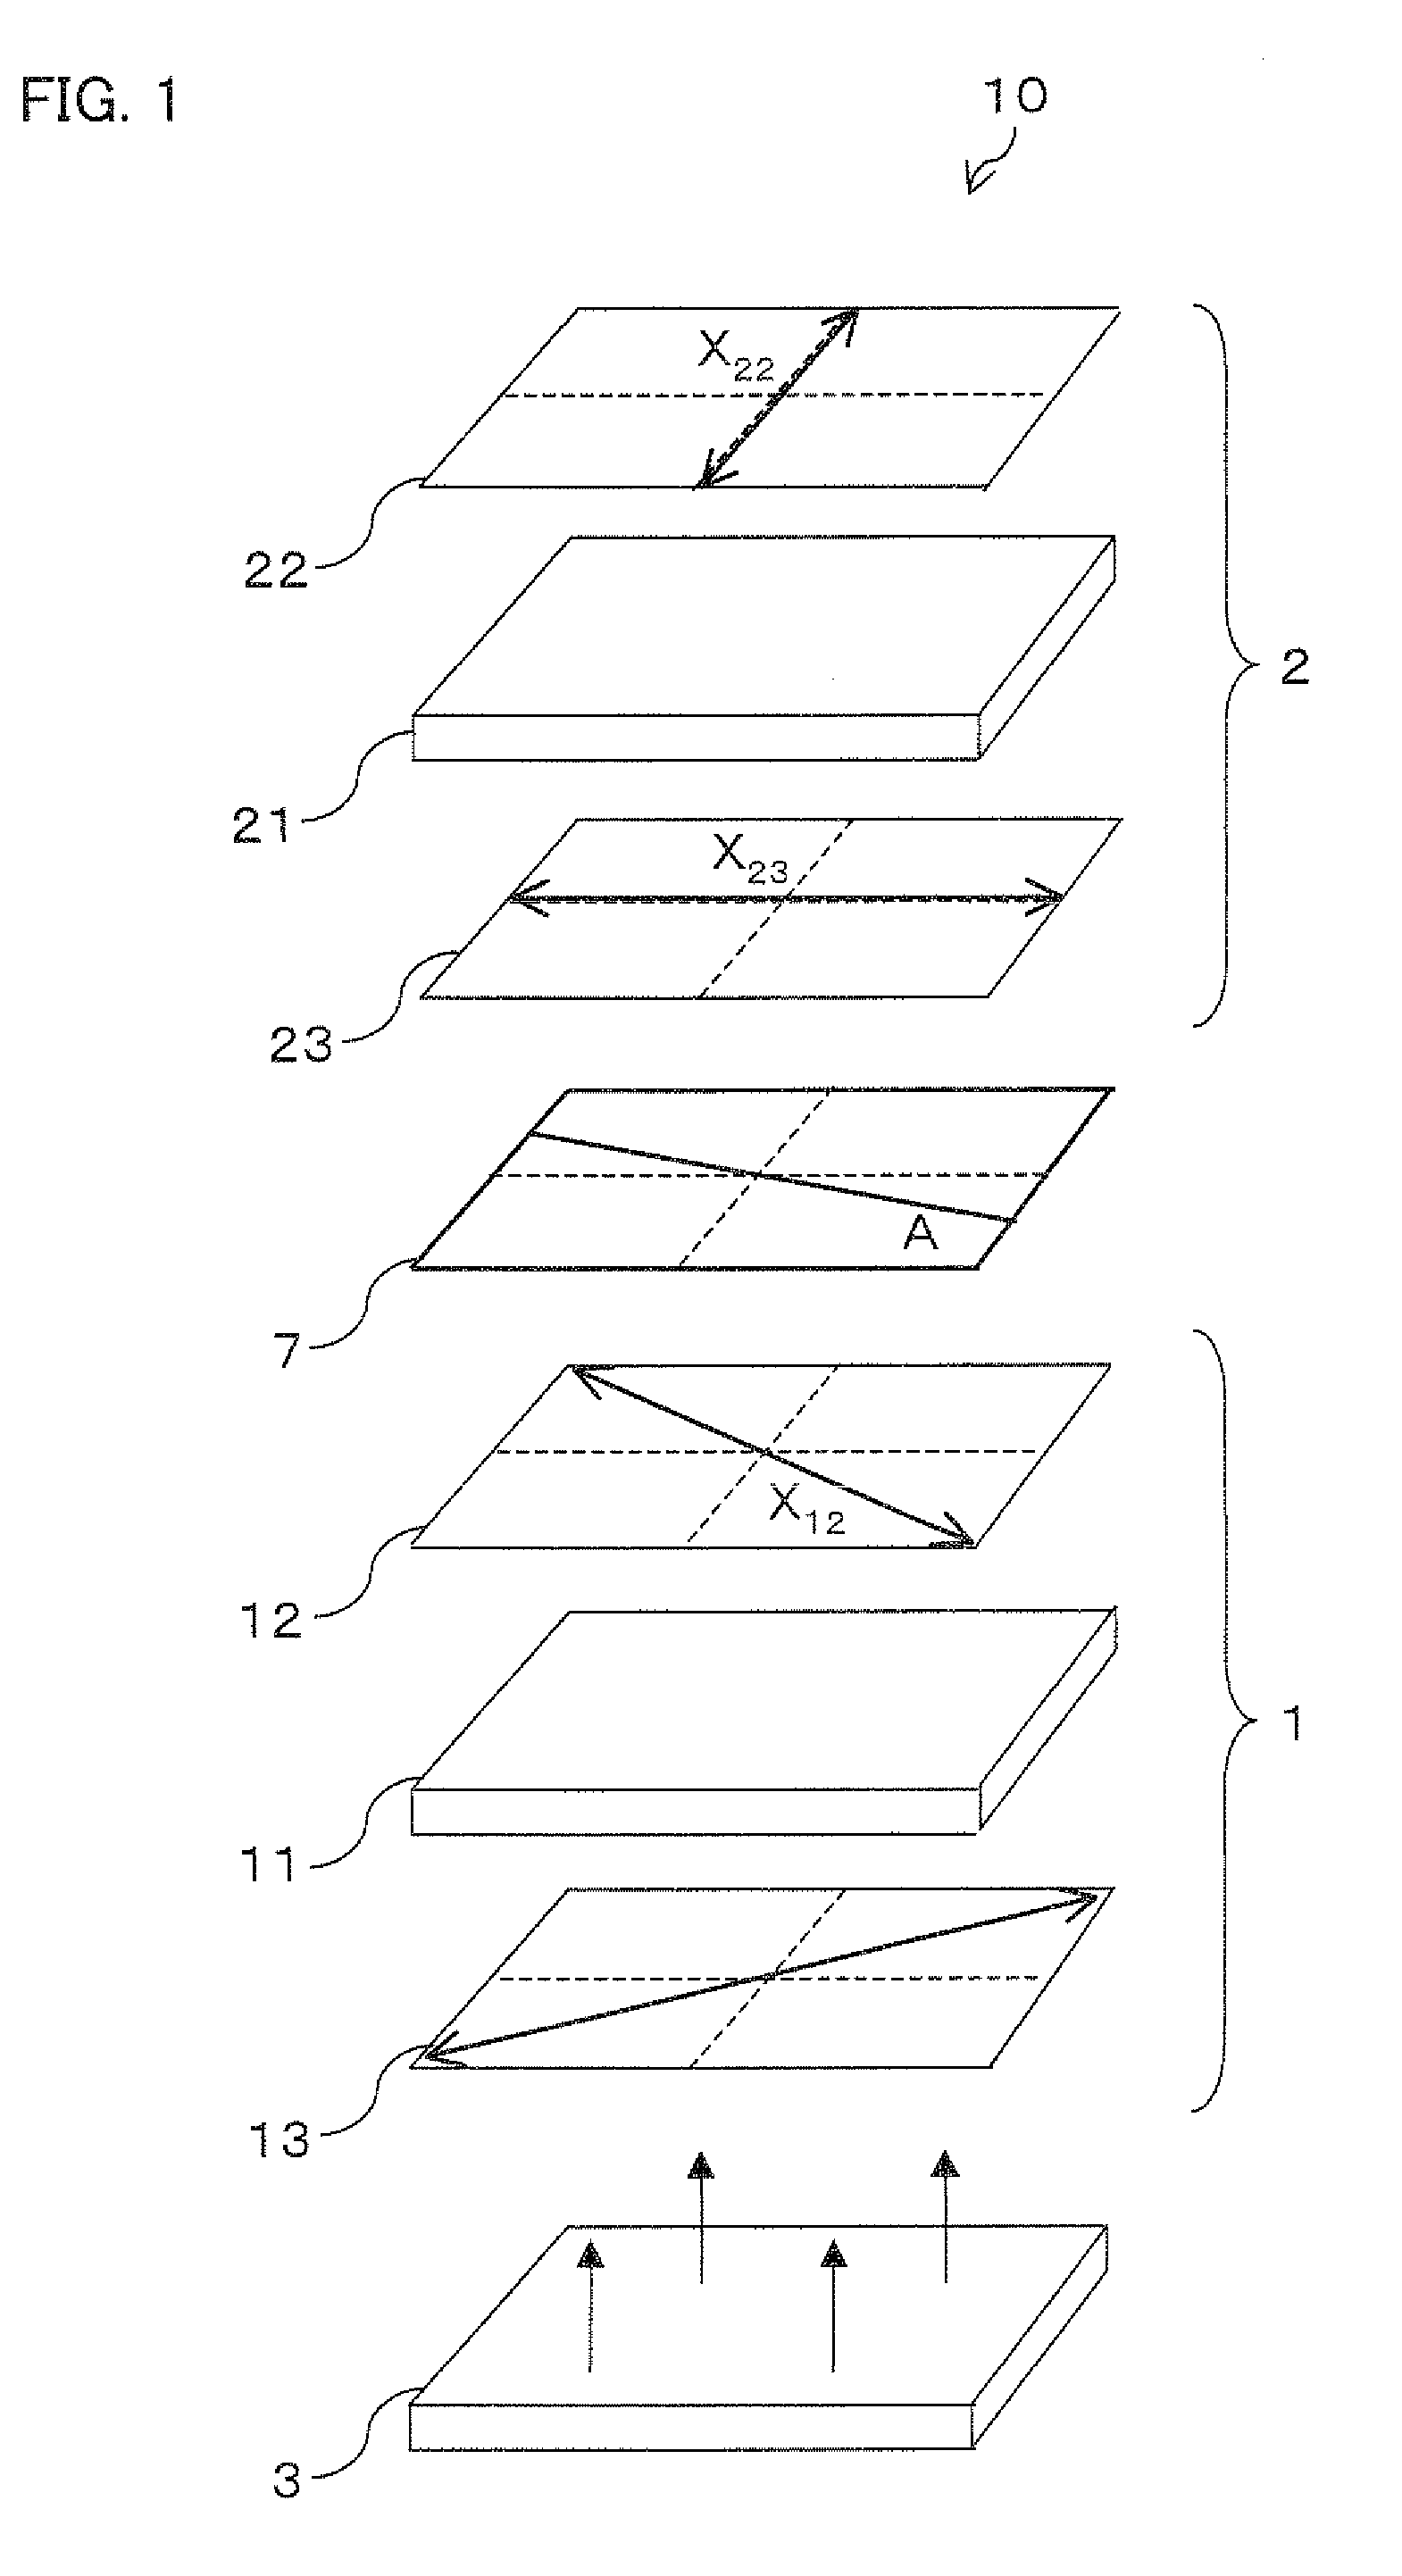 Liquid crystal display device and viewing angle control module